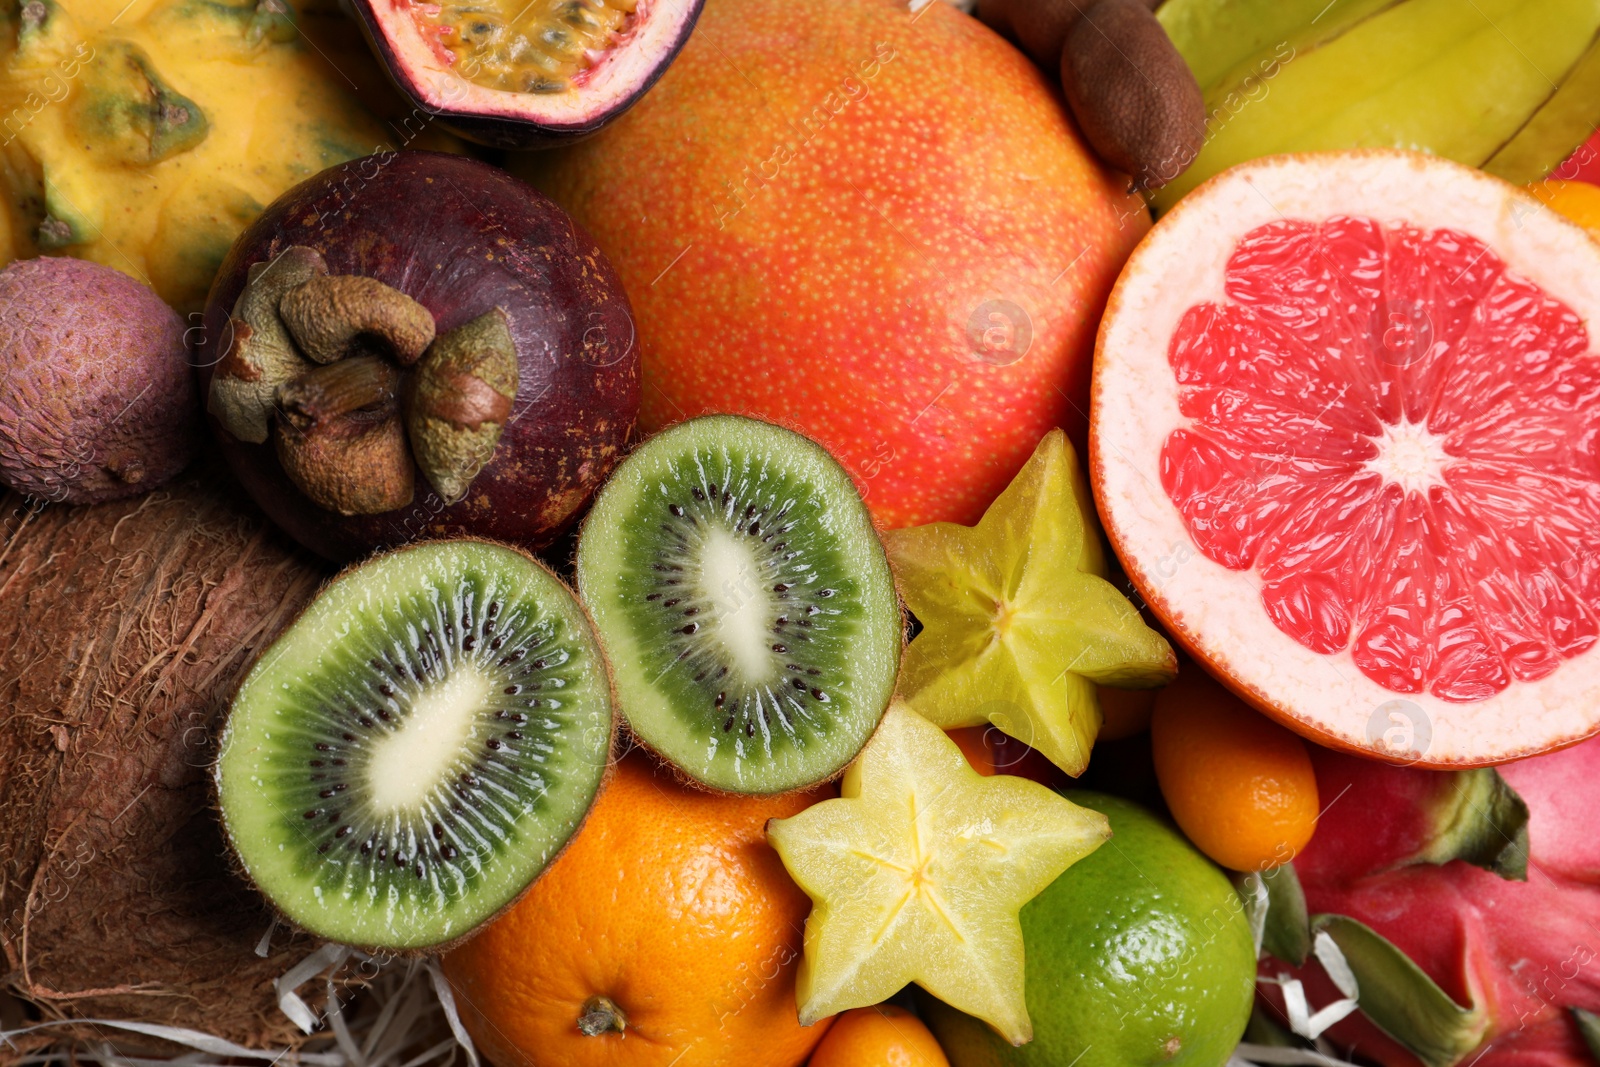 Photo of Different tropical fruits as background, closeup view